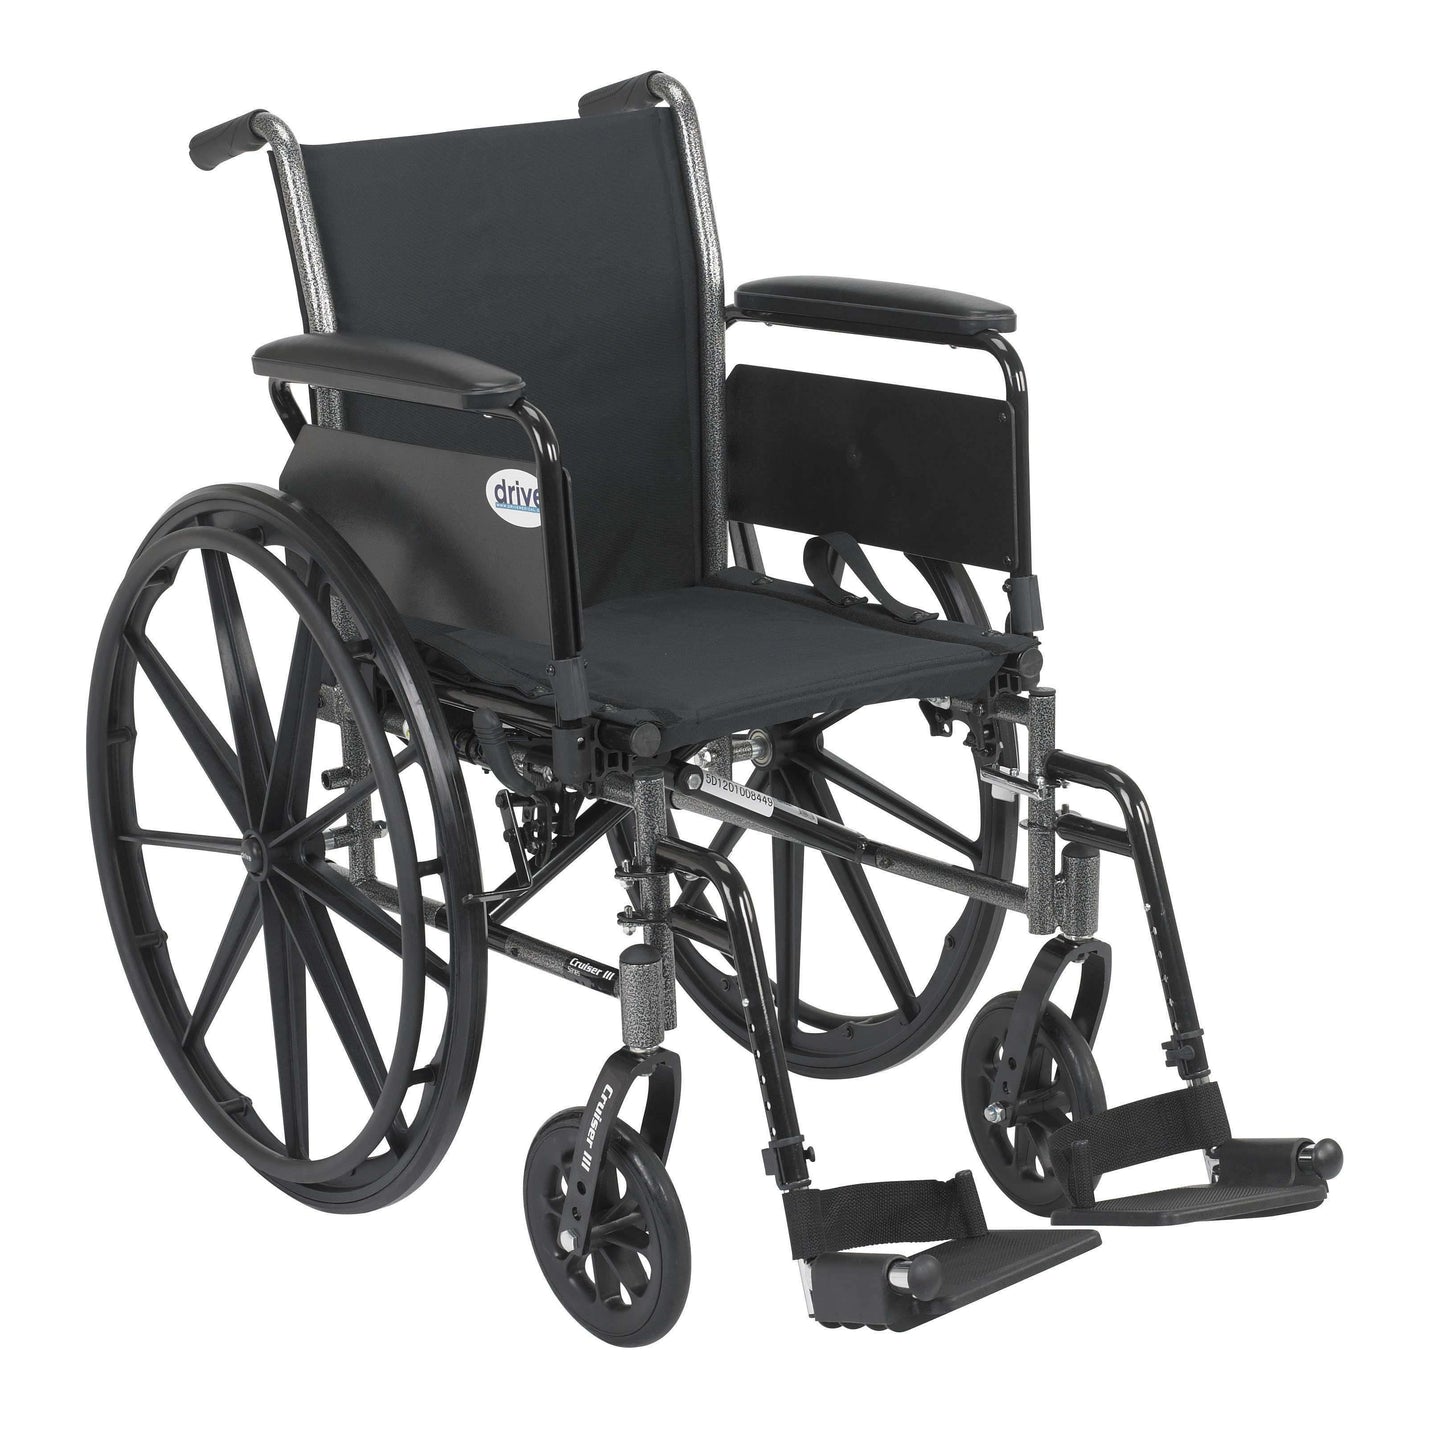 Drive k320dfa-sf Cruiser III Light Weight Wheelchair with Flip Back Removable Arms, Full Arms, Swing away Footrests, 20" Seat